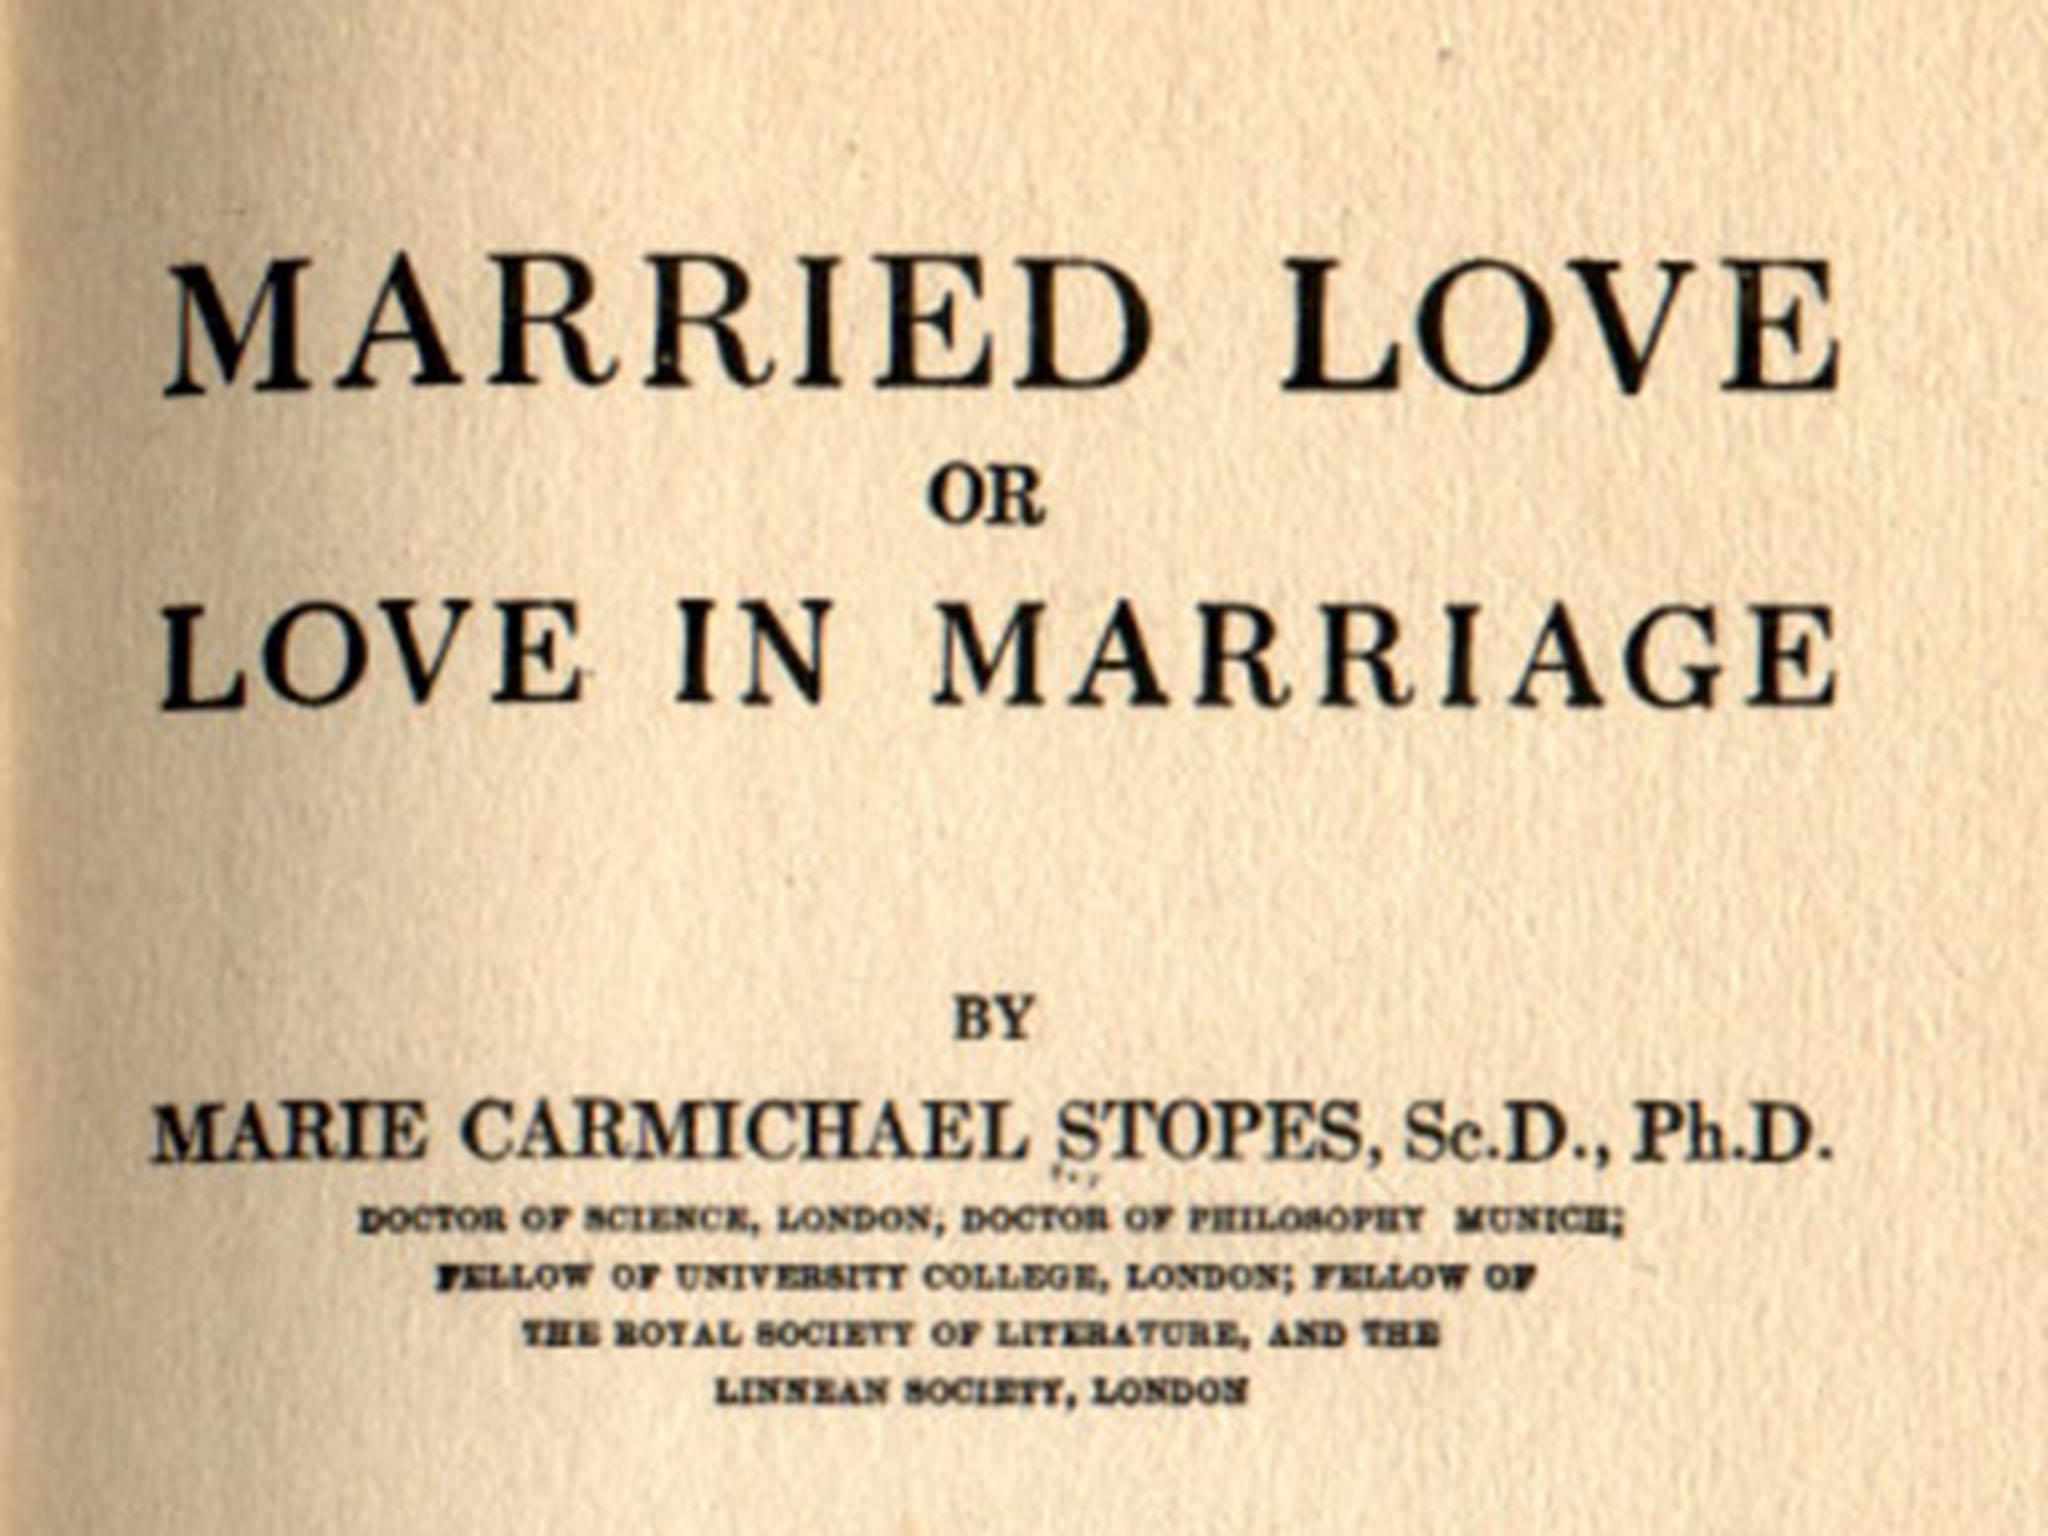 The first edition of ‘Married Love’